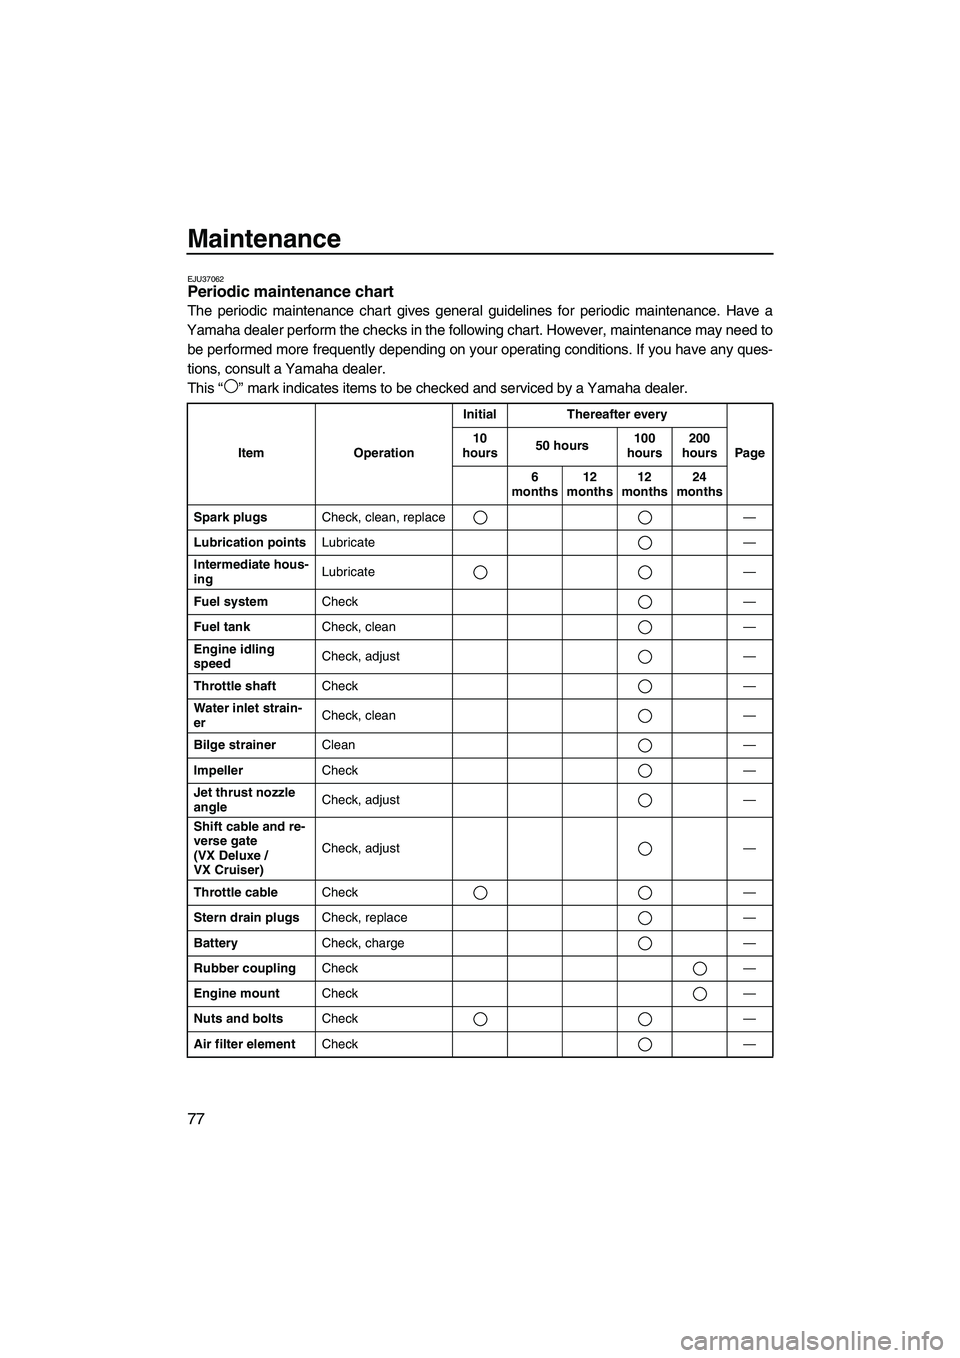 YAMAHA VX SPORT 2010  Owners Manual Maintenance
77
EJU37062Periodic maintenance chart 
The periodic maintenance chart gives general guidelines for periodic maintenance. Have a
Yamaha dealer perform the checks in the following chart. How